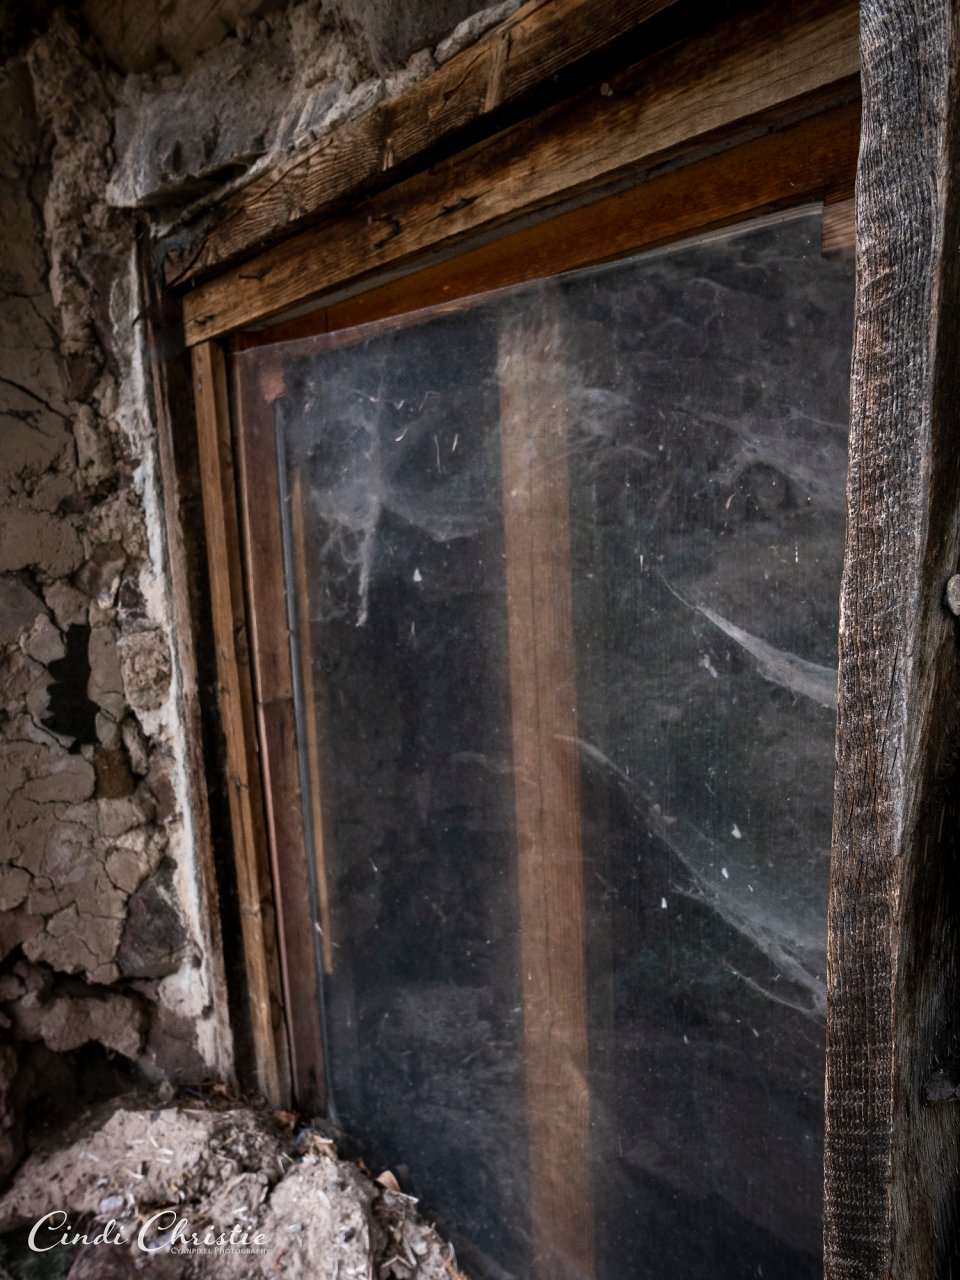 A dusty window offers a glimpse into this structure's interior,